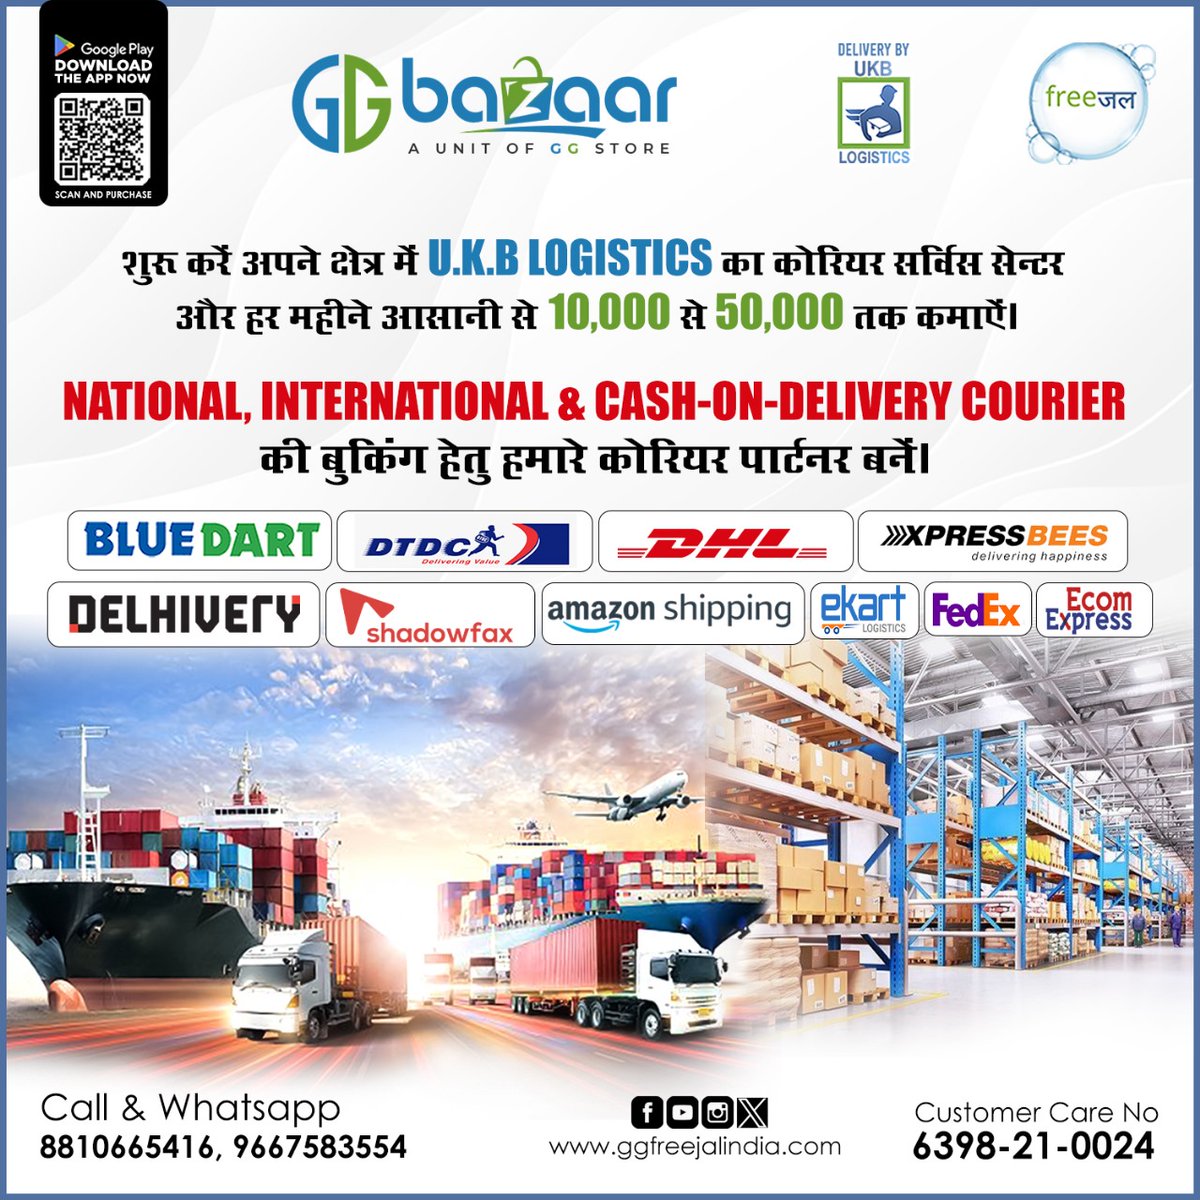 Start expanding your reach with U.K.B.! Open a logistic courier service center in your area or partner up as one of our reliable couriers. Book national, international, and cash on delivery services to effortlessly earn between Rs 10,000 to Rs 50,000 monthly
#ggbazaar #bazaar